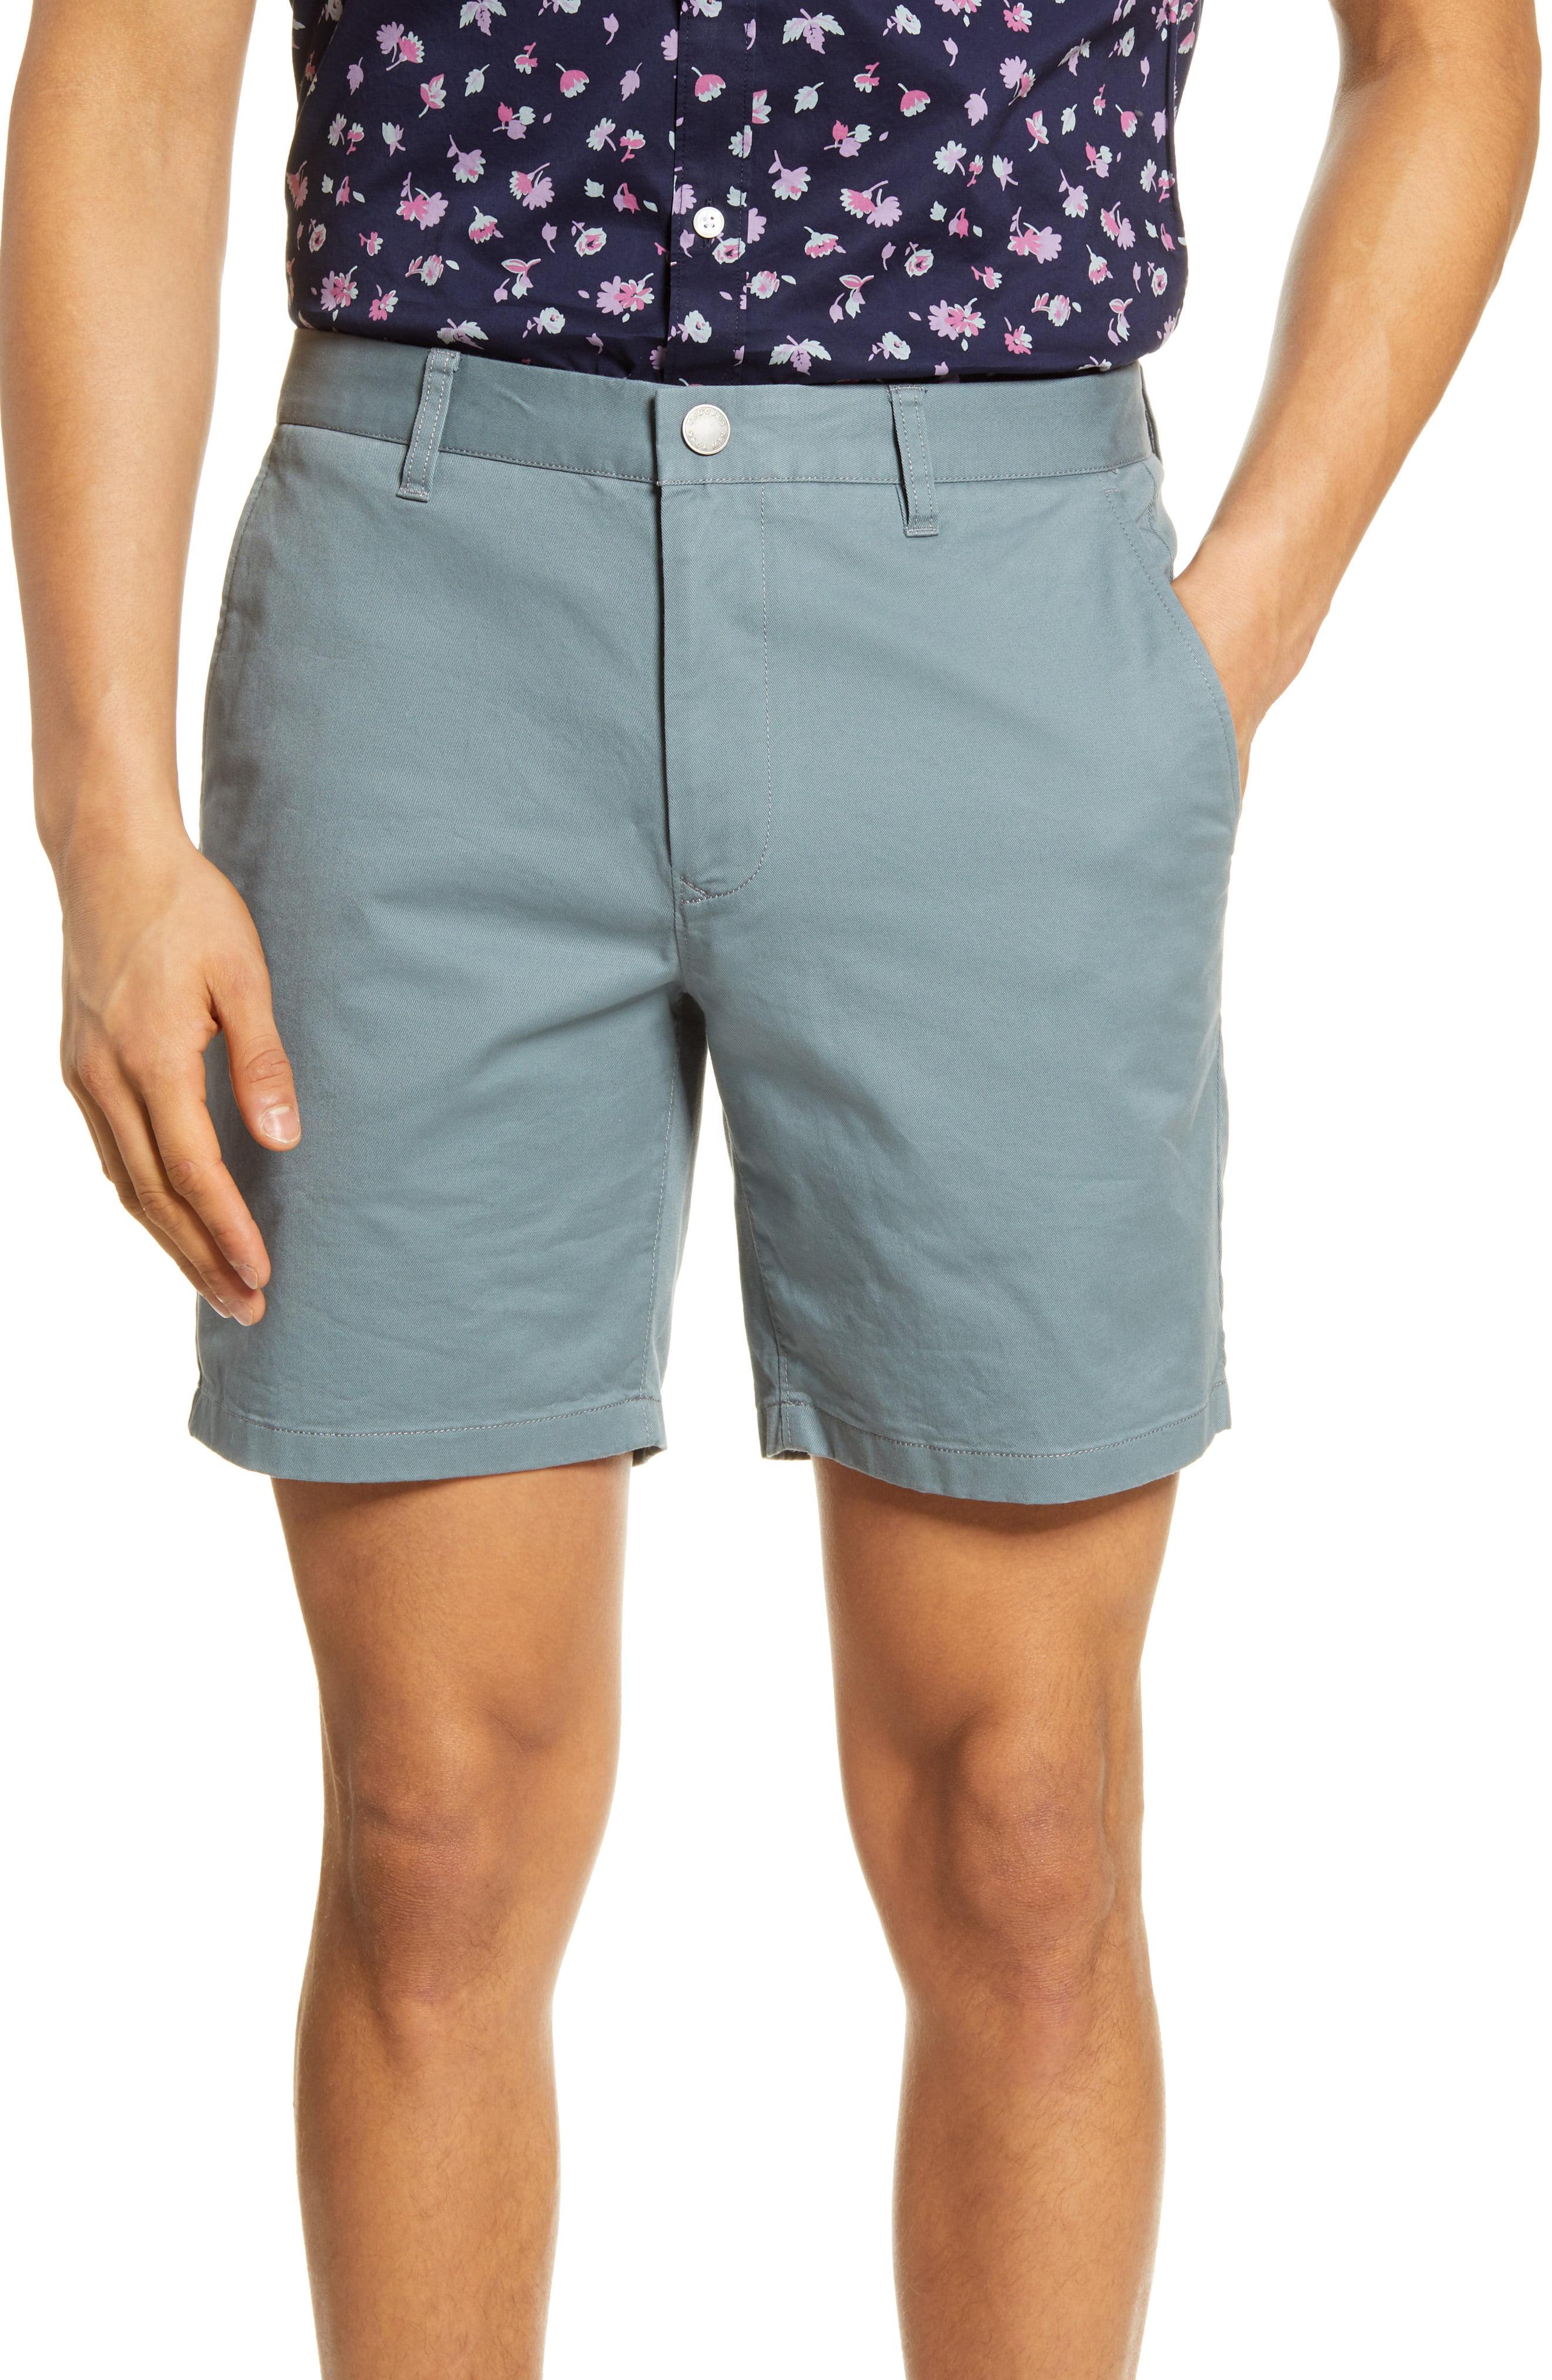 Bonobos Stretch Washed Chino 7-inch Shorts in Blue for Men - Save 50% ...